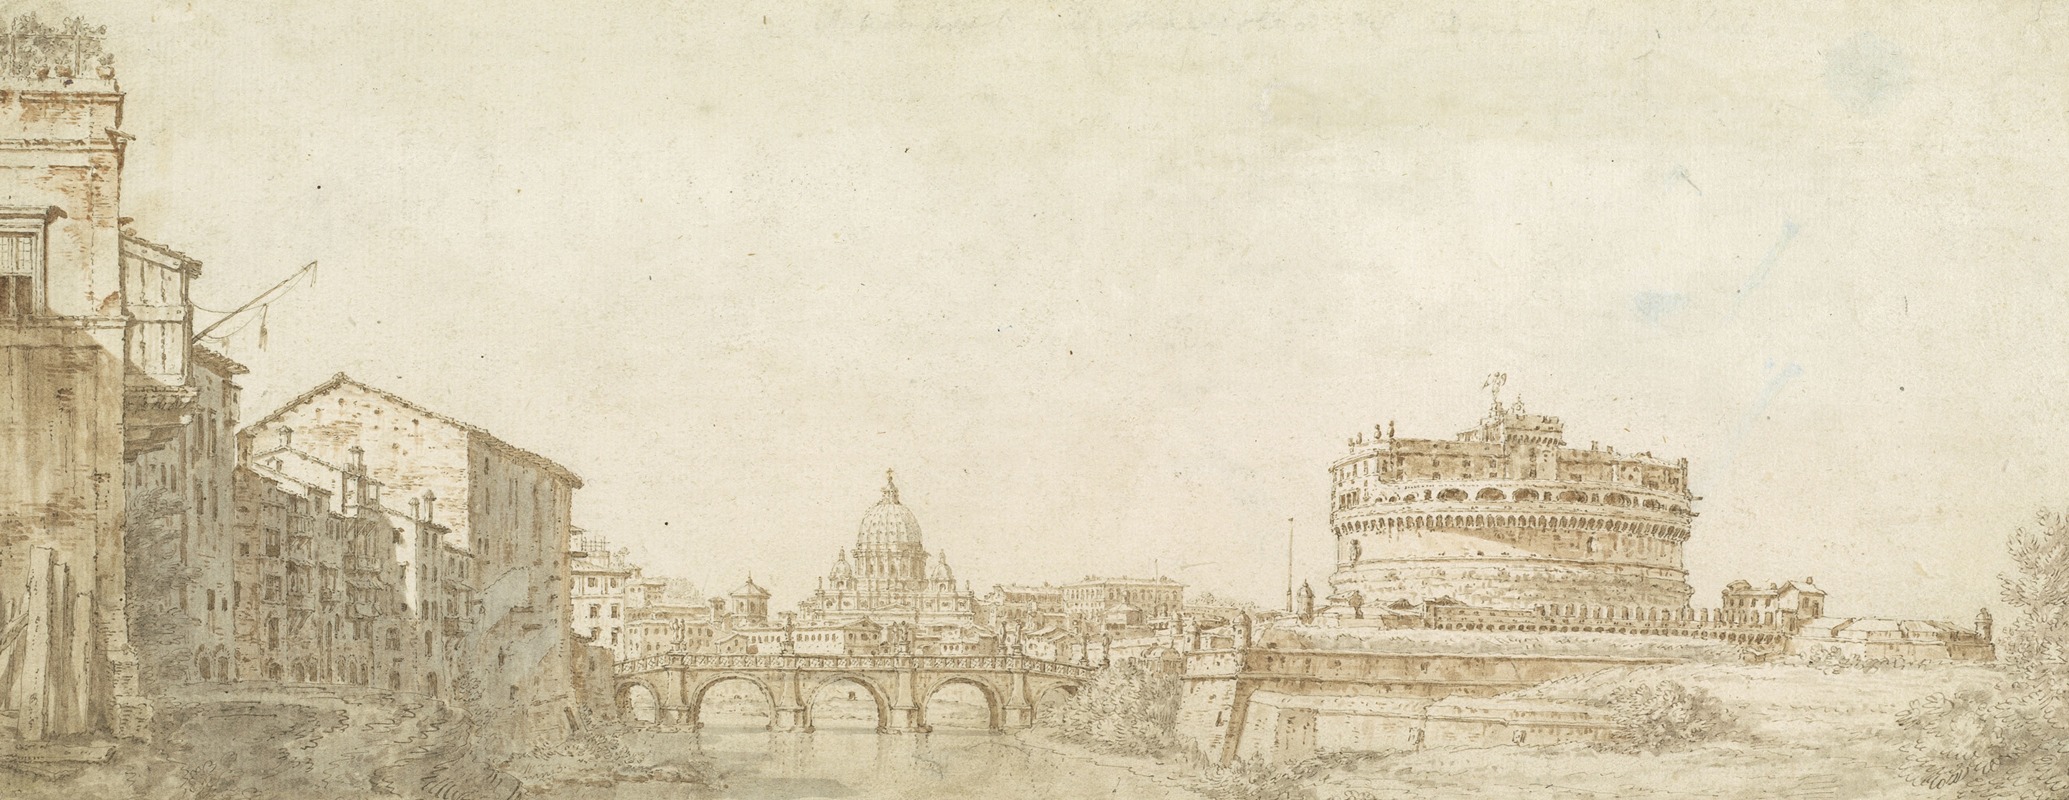 Giuseppe Zocchi - View of Rome with the Dome of Saint Peter’s and the Castel Sant’ Angelo